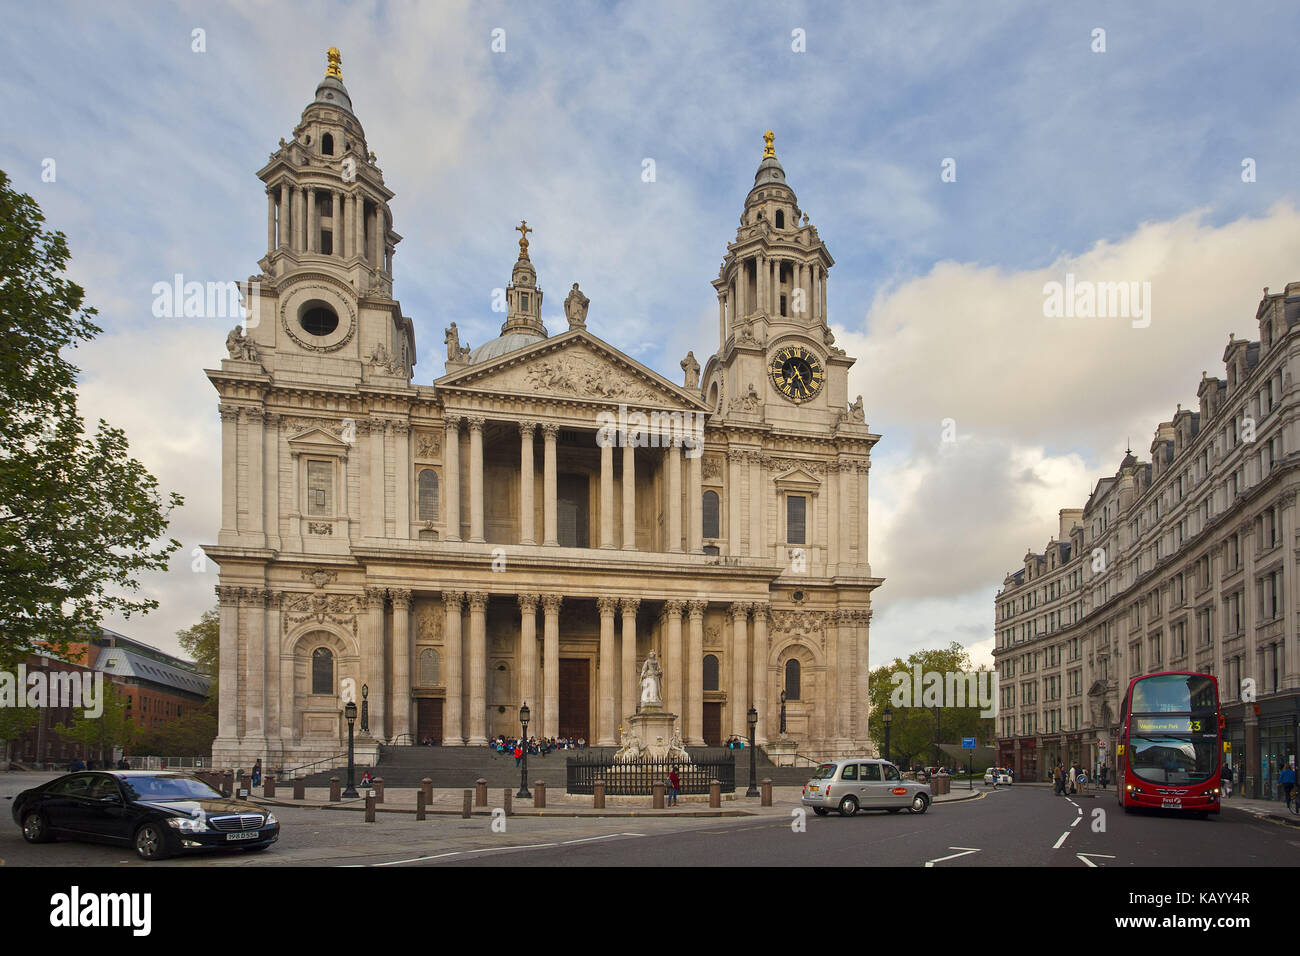 Great Britain, London, St. Paul's Cathedral, Stock Photo